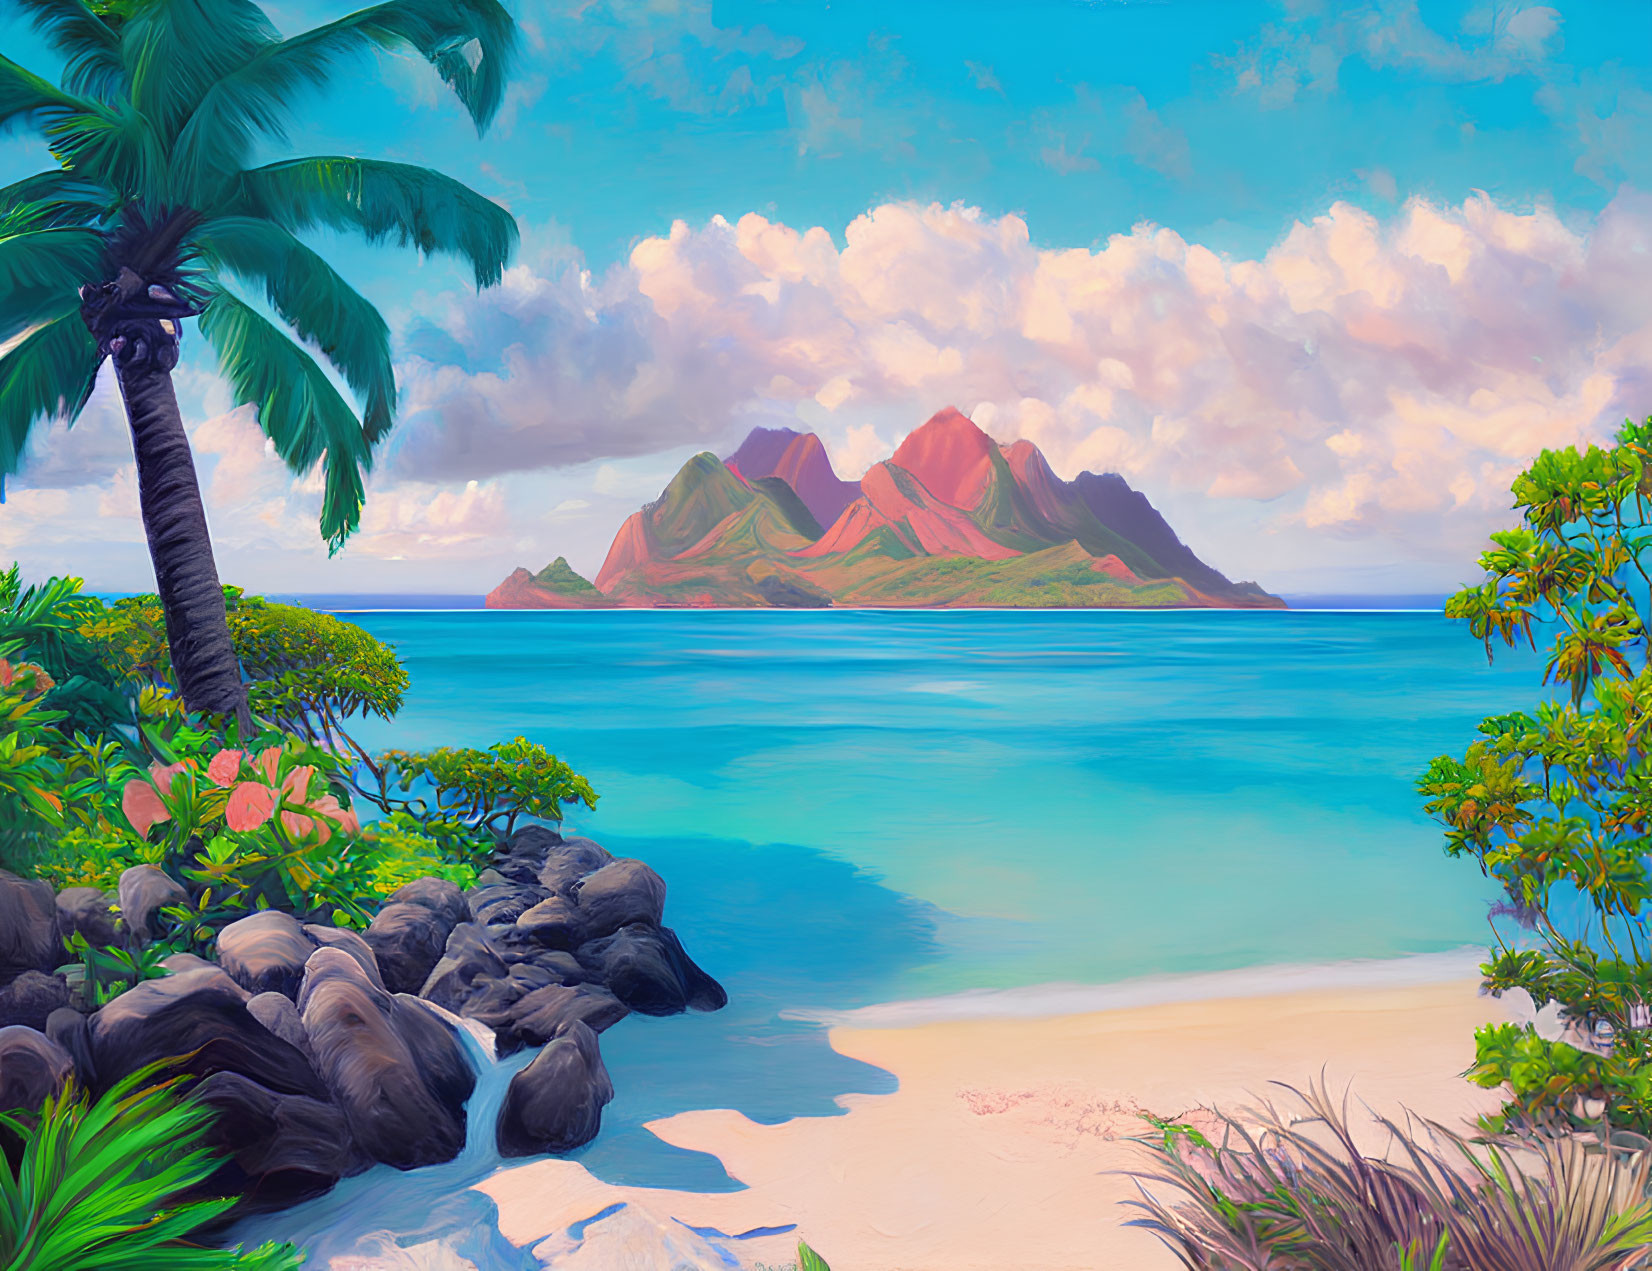 Tropical Seascape with Beach, Palm Trees, and Mountains